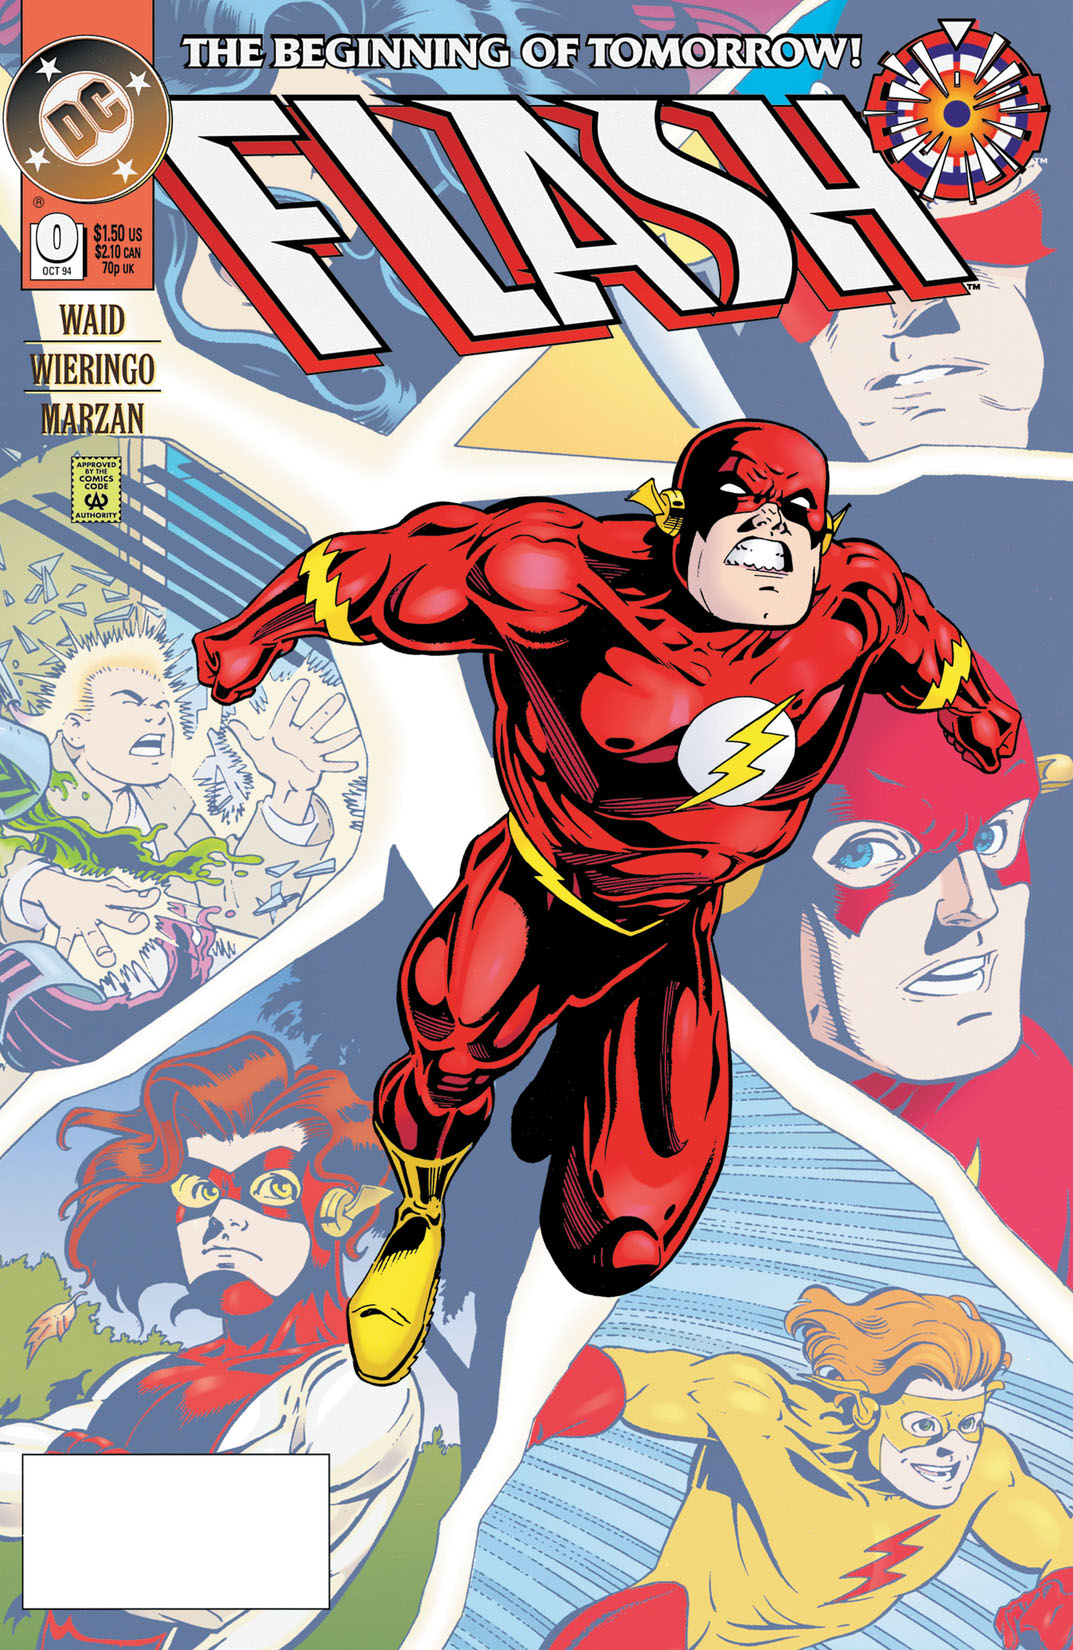 The Flash (1987-2008) #0 preview images